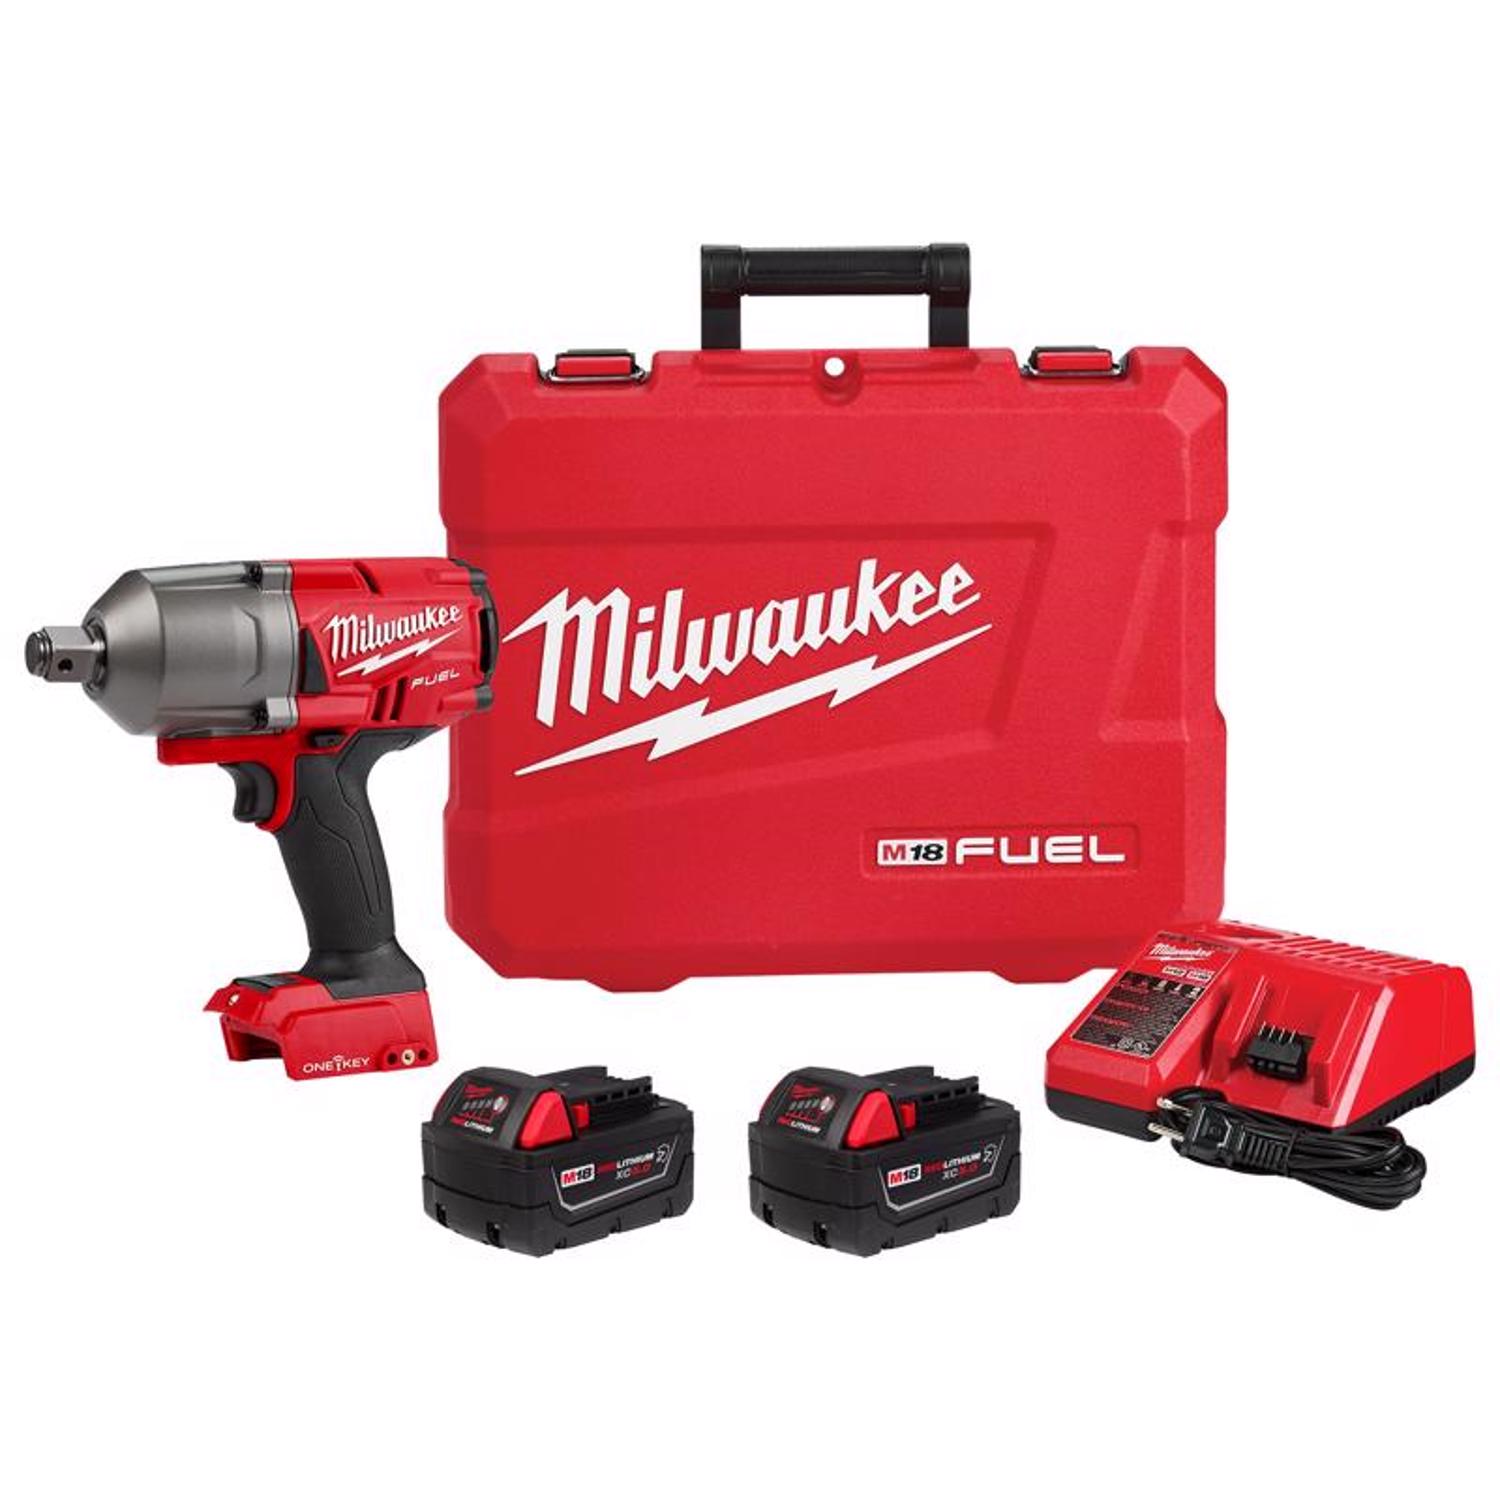 Photos - Drill / Screwdriver Milwaukee M18 FUEL 3/4 in. Cordless Brushless High Torque Impact Wrench Ki 